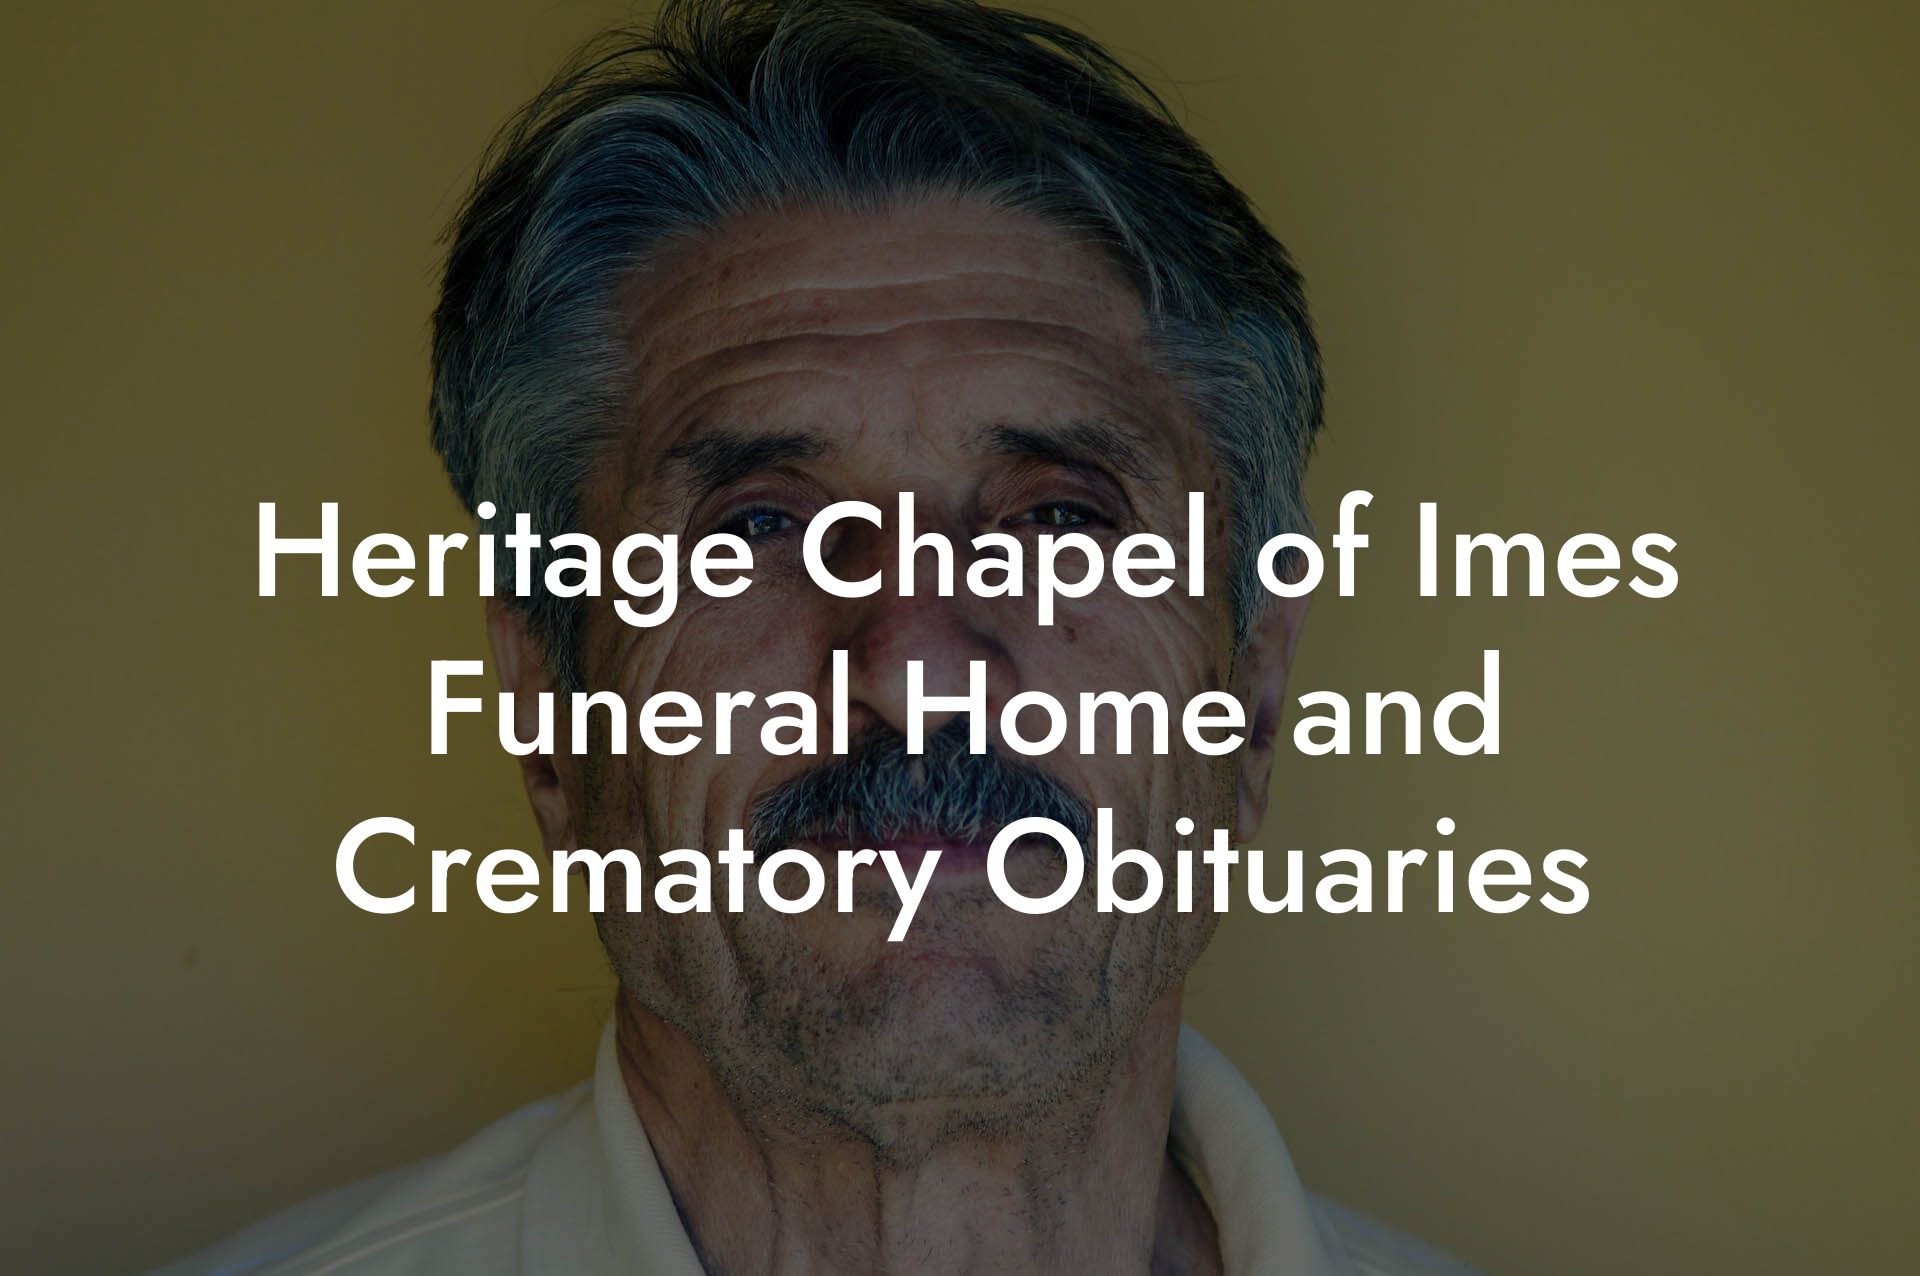 Heritage Chapel of Imes Funeral Home and Crematory Obituaries